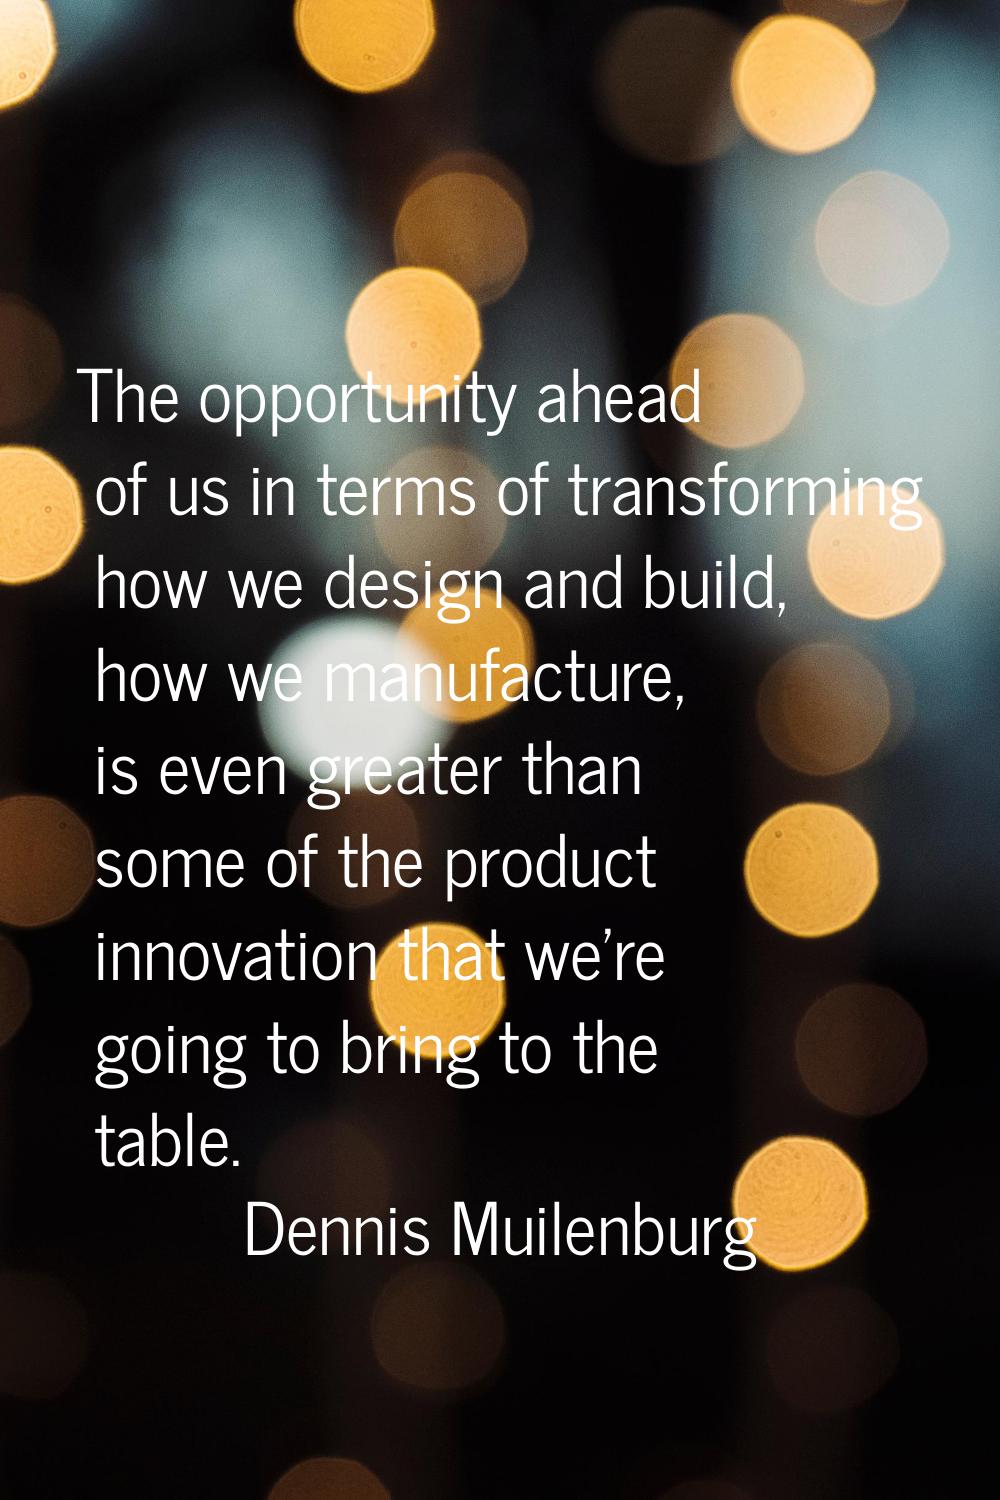 The opportunity ahead of us in terms of transforming how we design and build, how we manufacture, i